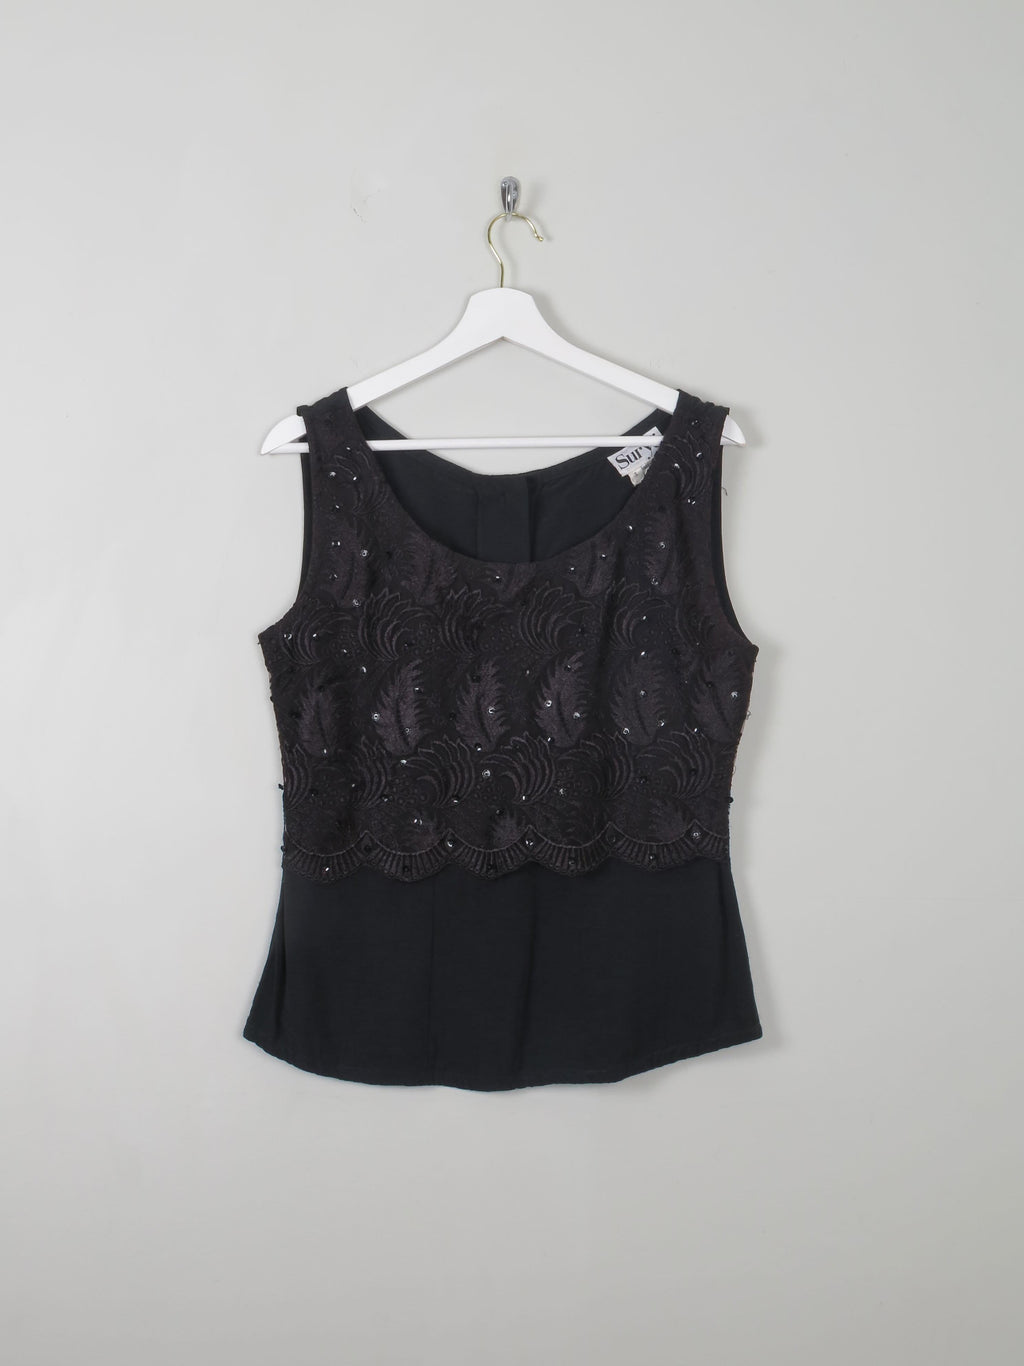 Women's Vintage Black Top With Lace Detail S - The Harlequin